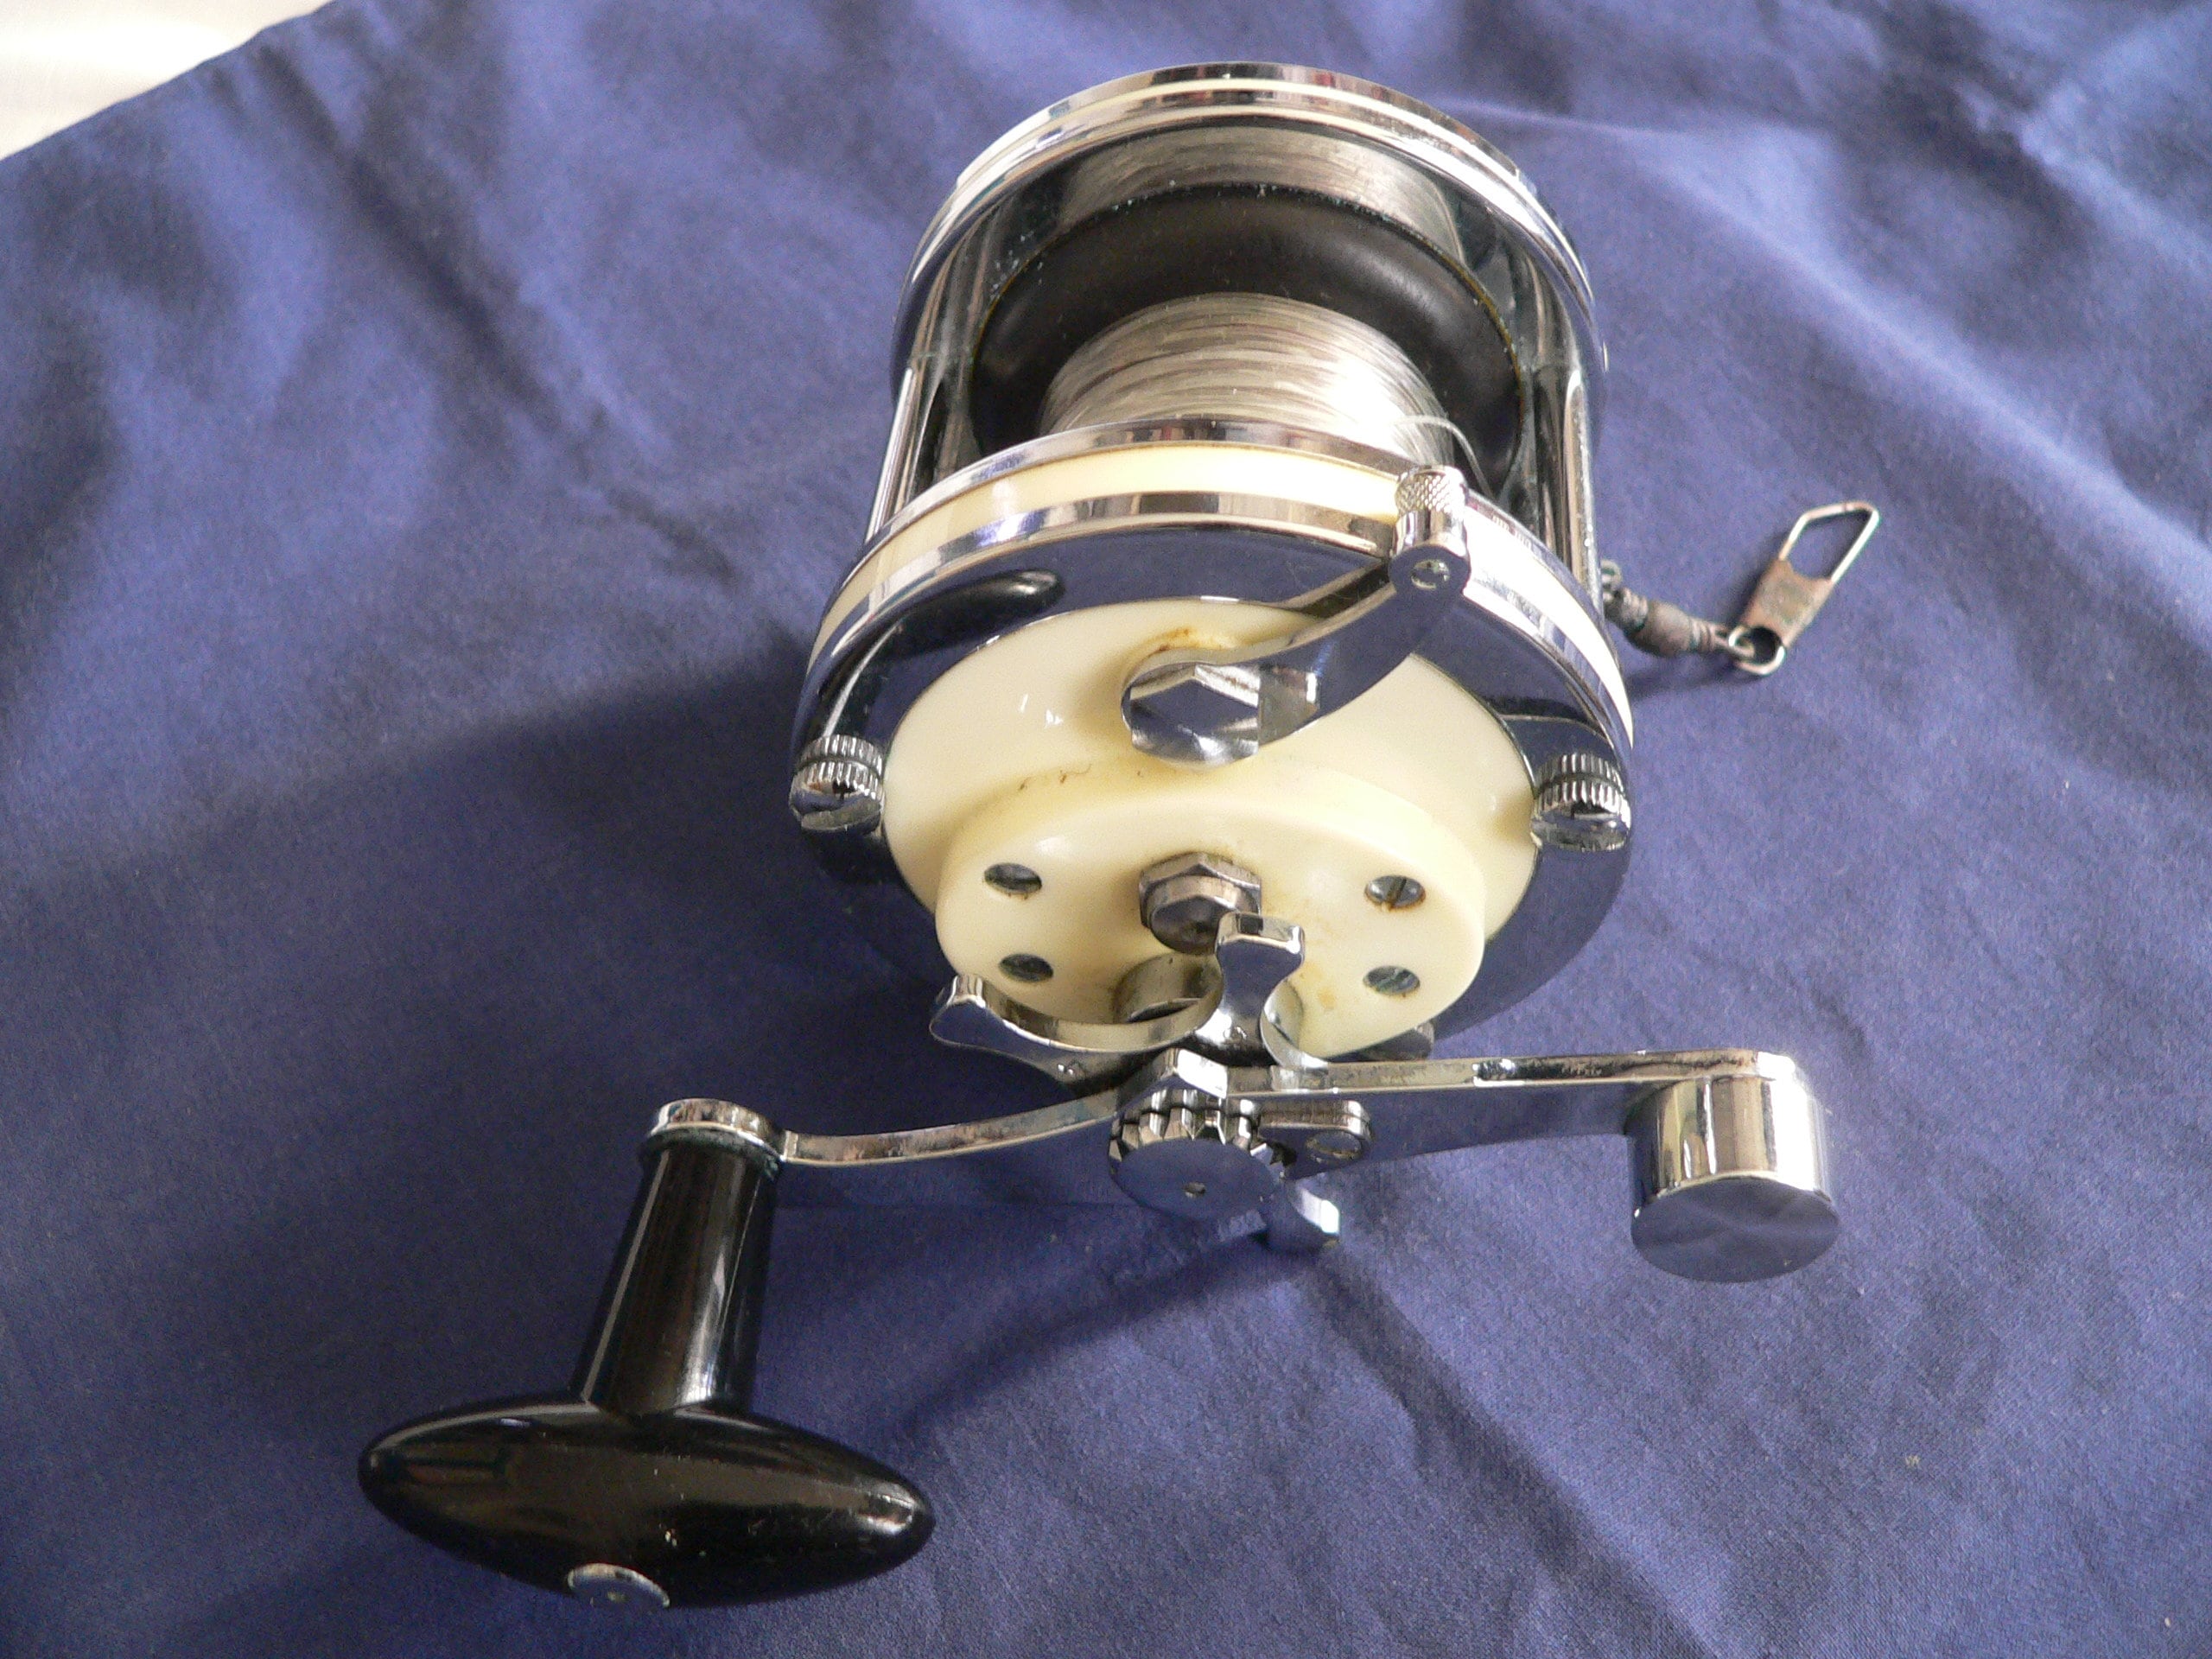 Vintage Alcedo Micron Ultralight Spinning Reel W/box & Papers Made in Italy  -  Sweden